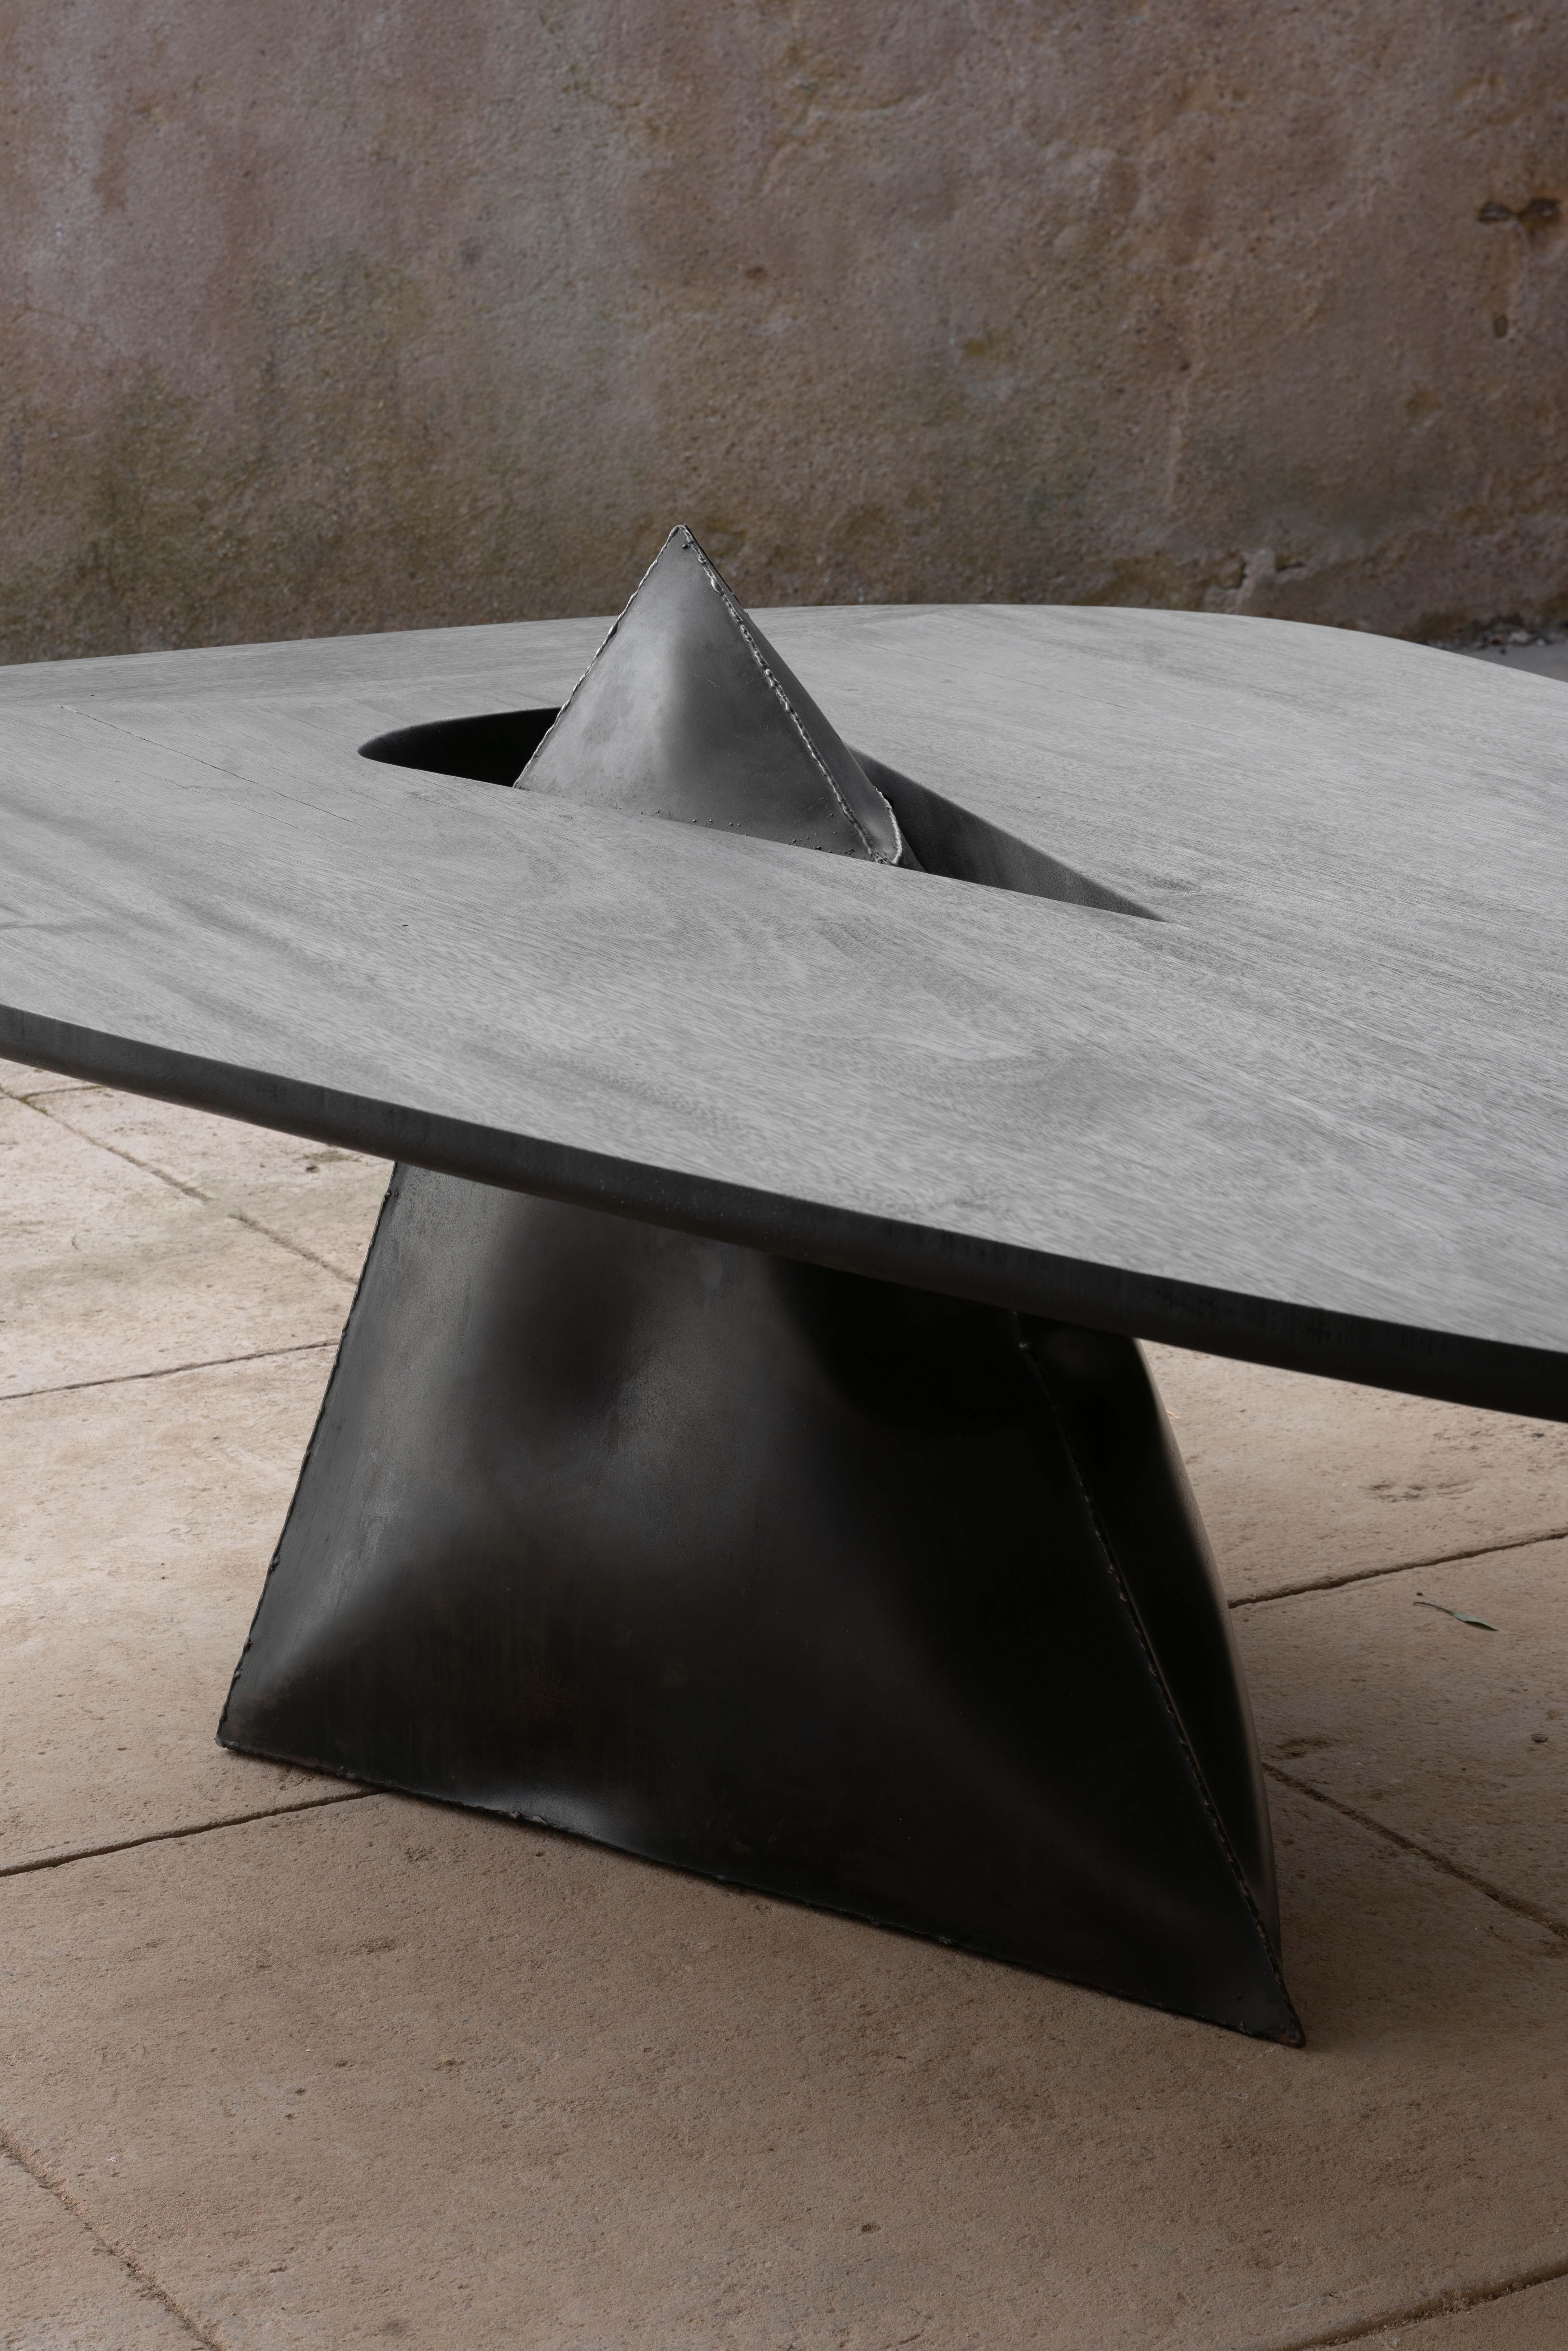 Lose Control Table is handcrafted using only two elements: a Metal Volume spontaneously shaped by an explosion, and a highly treated, hand shaped piece of Burnt Zazange Wood. One element slots into the other in a seemingly precarious manner,